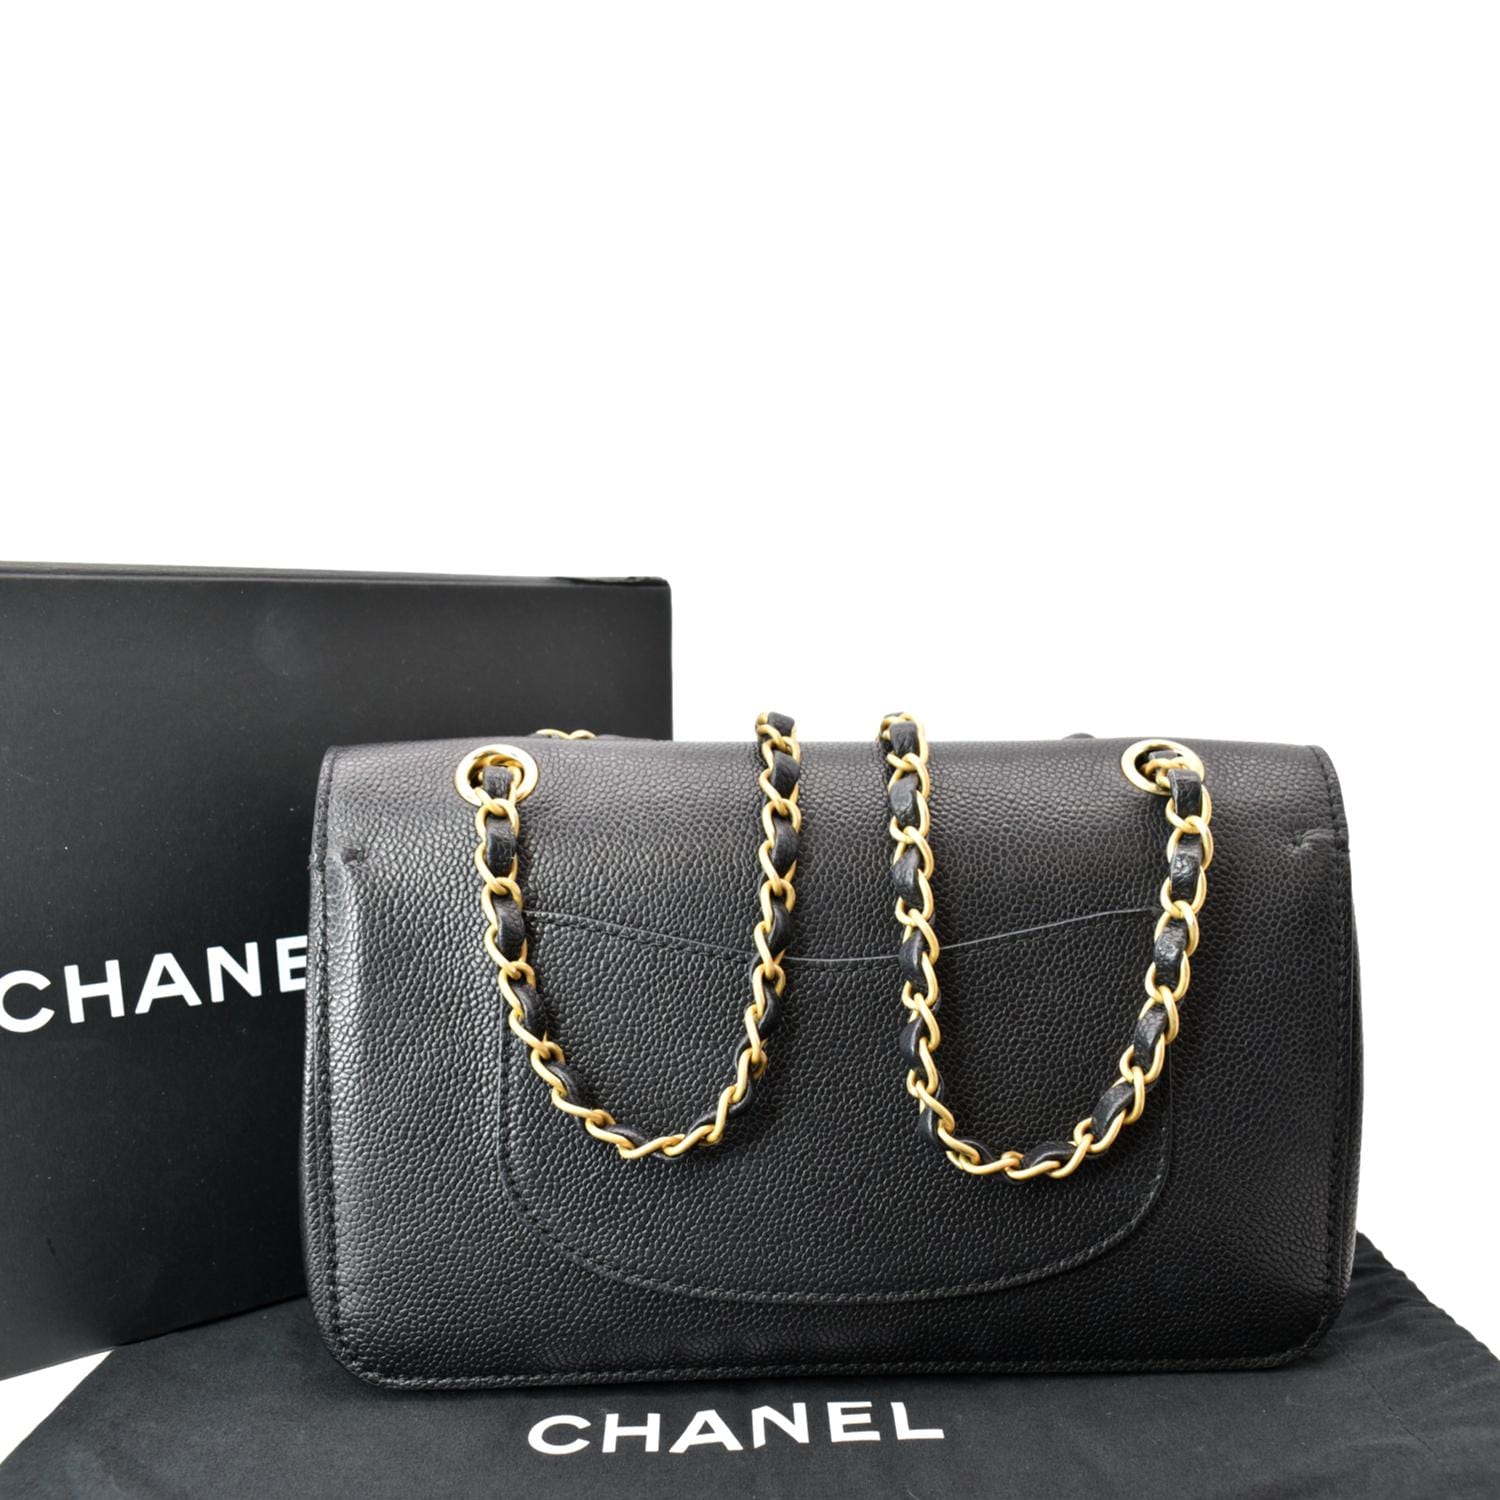 2013 Chanel Black Quilted Caviar Leather Medium Classic Double